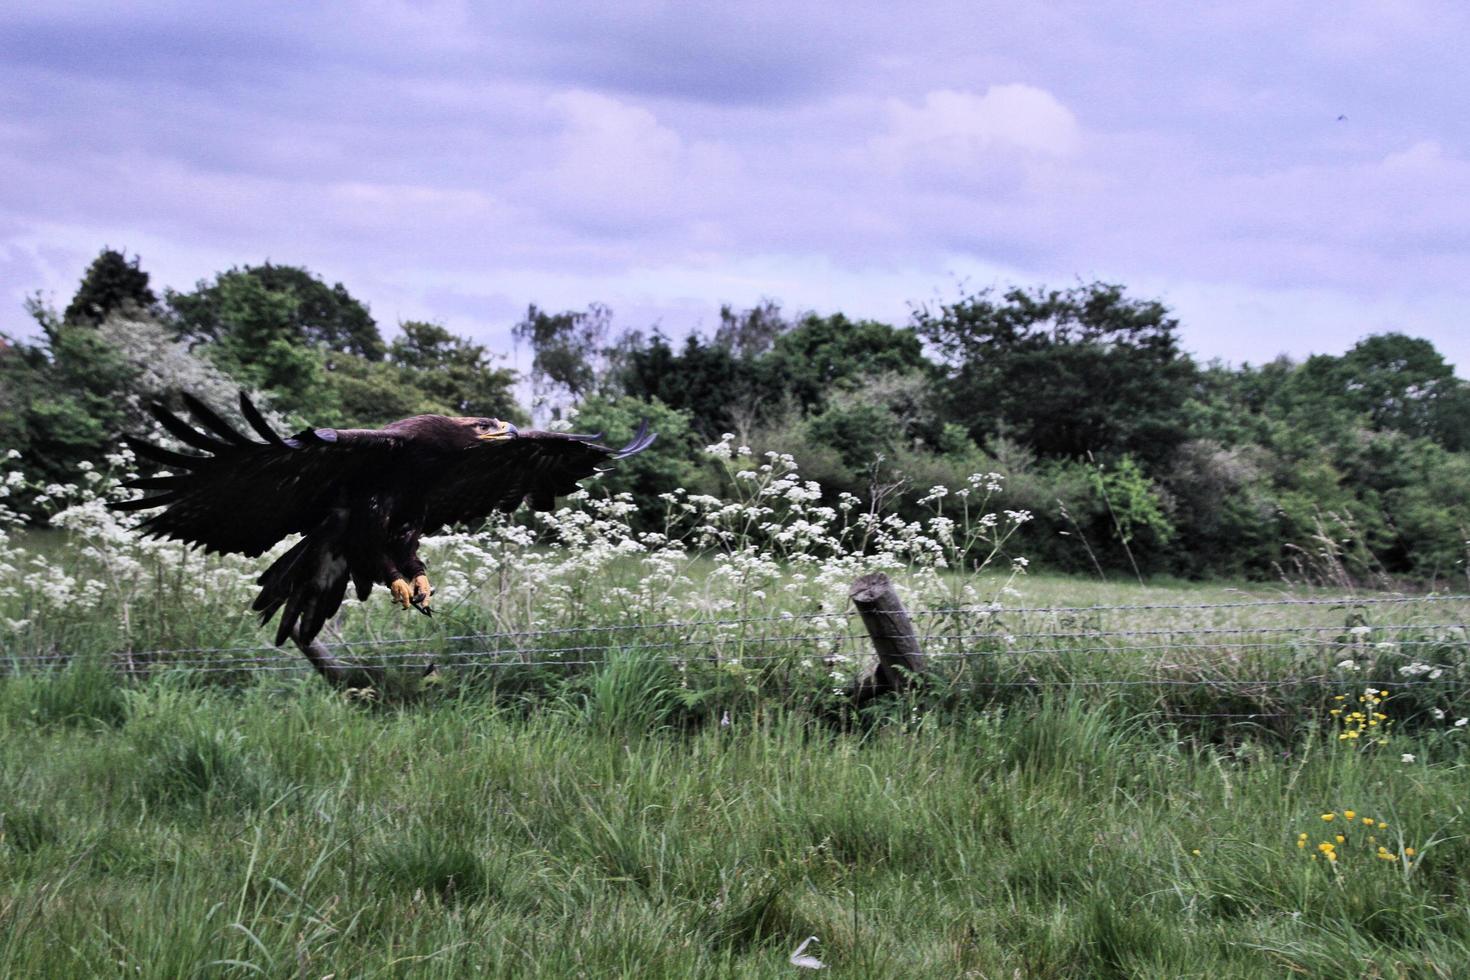 A view of a Steppe Eagle in flight photo